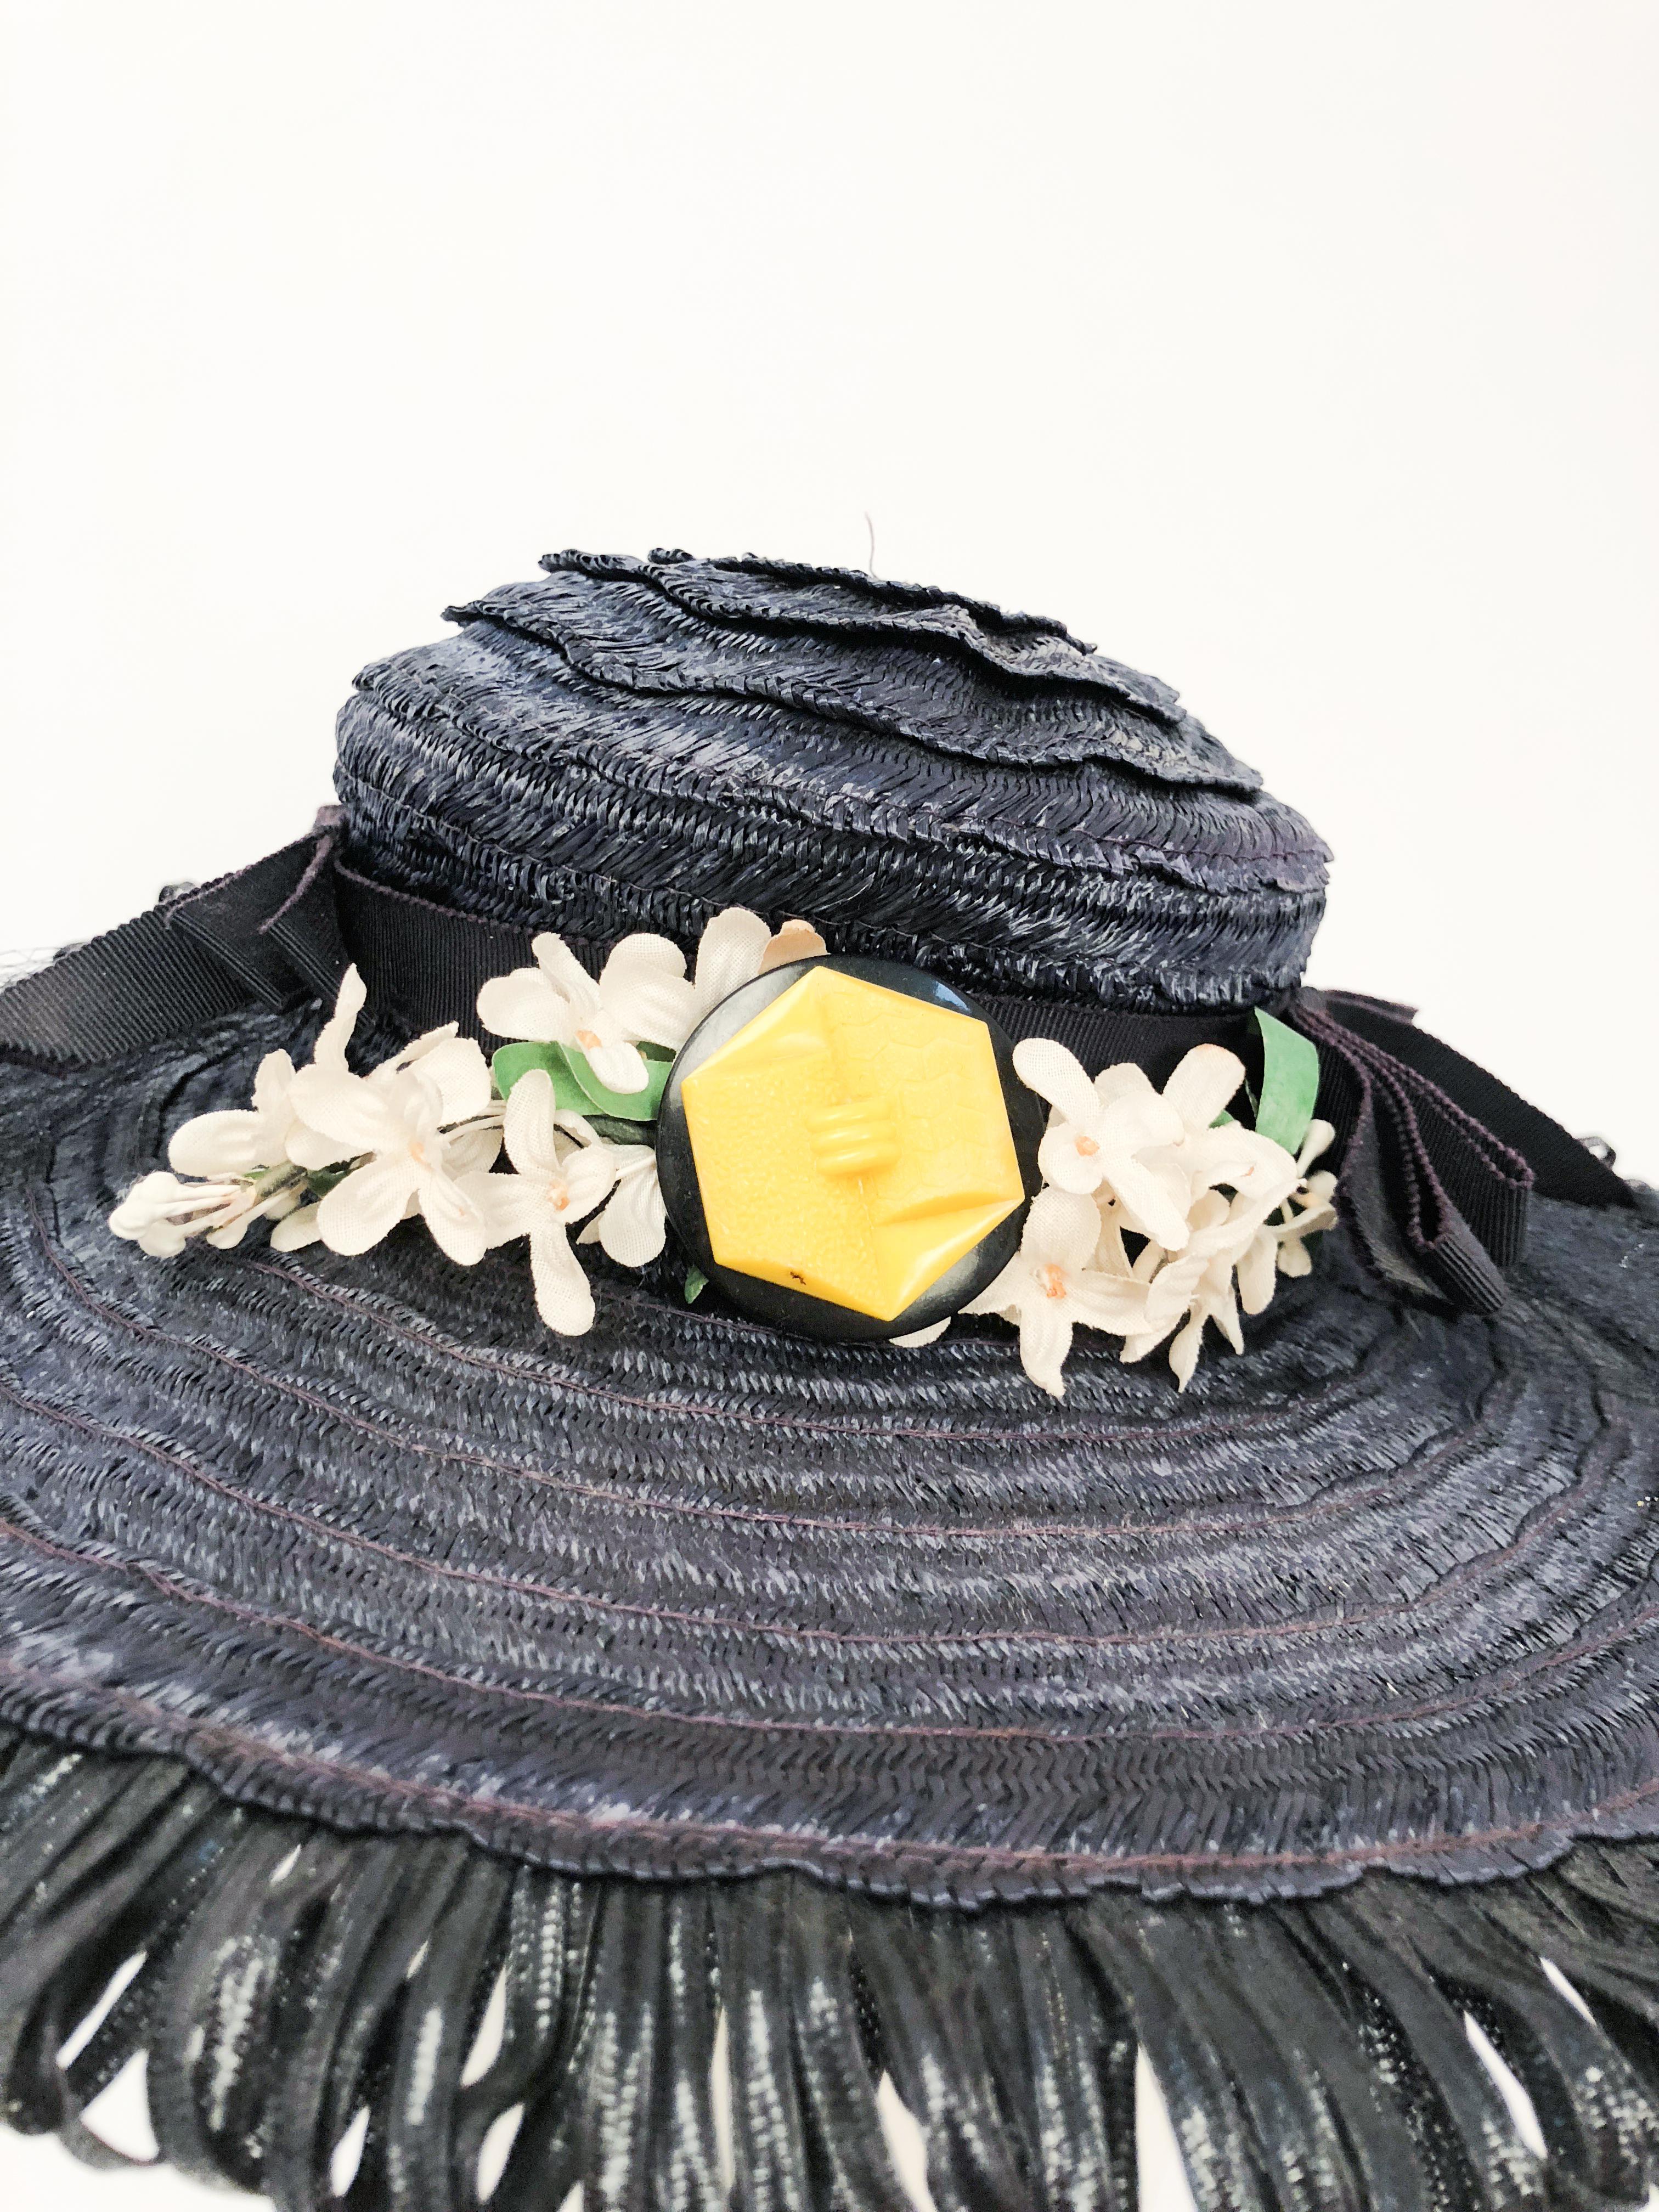 1940s Navy Woven Raffia Cartwheel Hat. Navy woven raffia cartwheel hat decorated with petersham bows, match hat band, silk flowers, draped veil and backbite buttons. Petersham hat band with elastic used to secure hat to head.